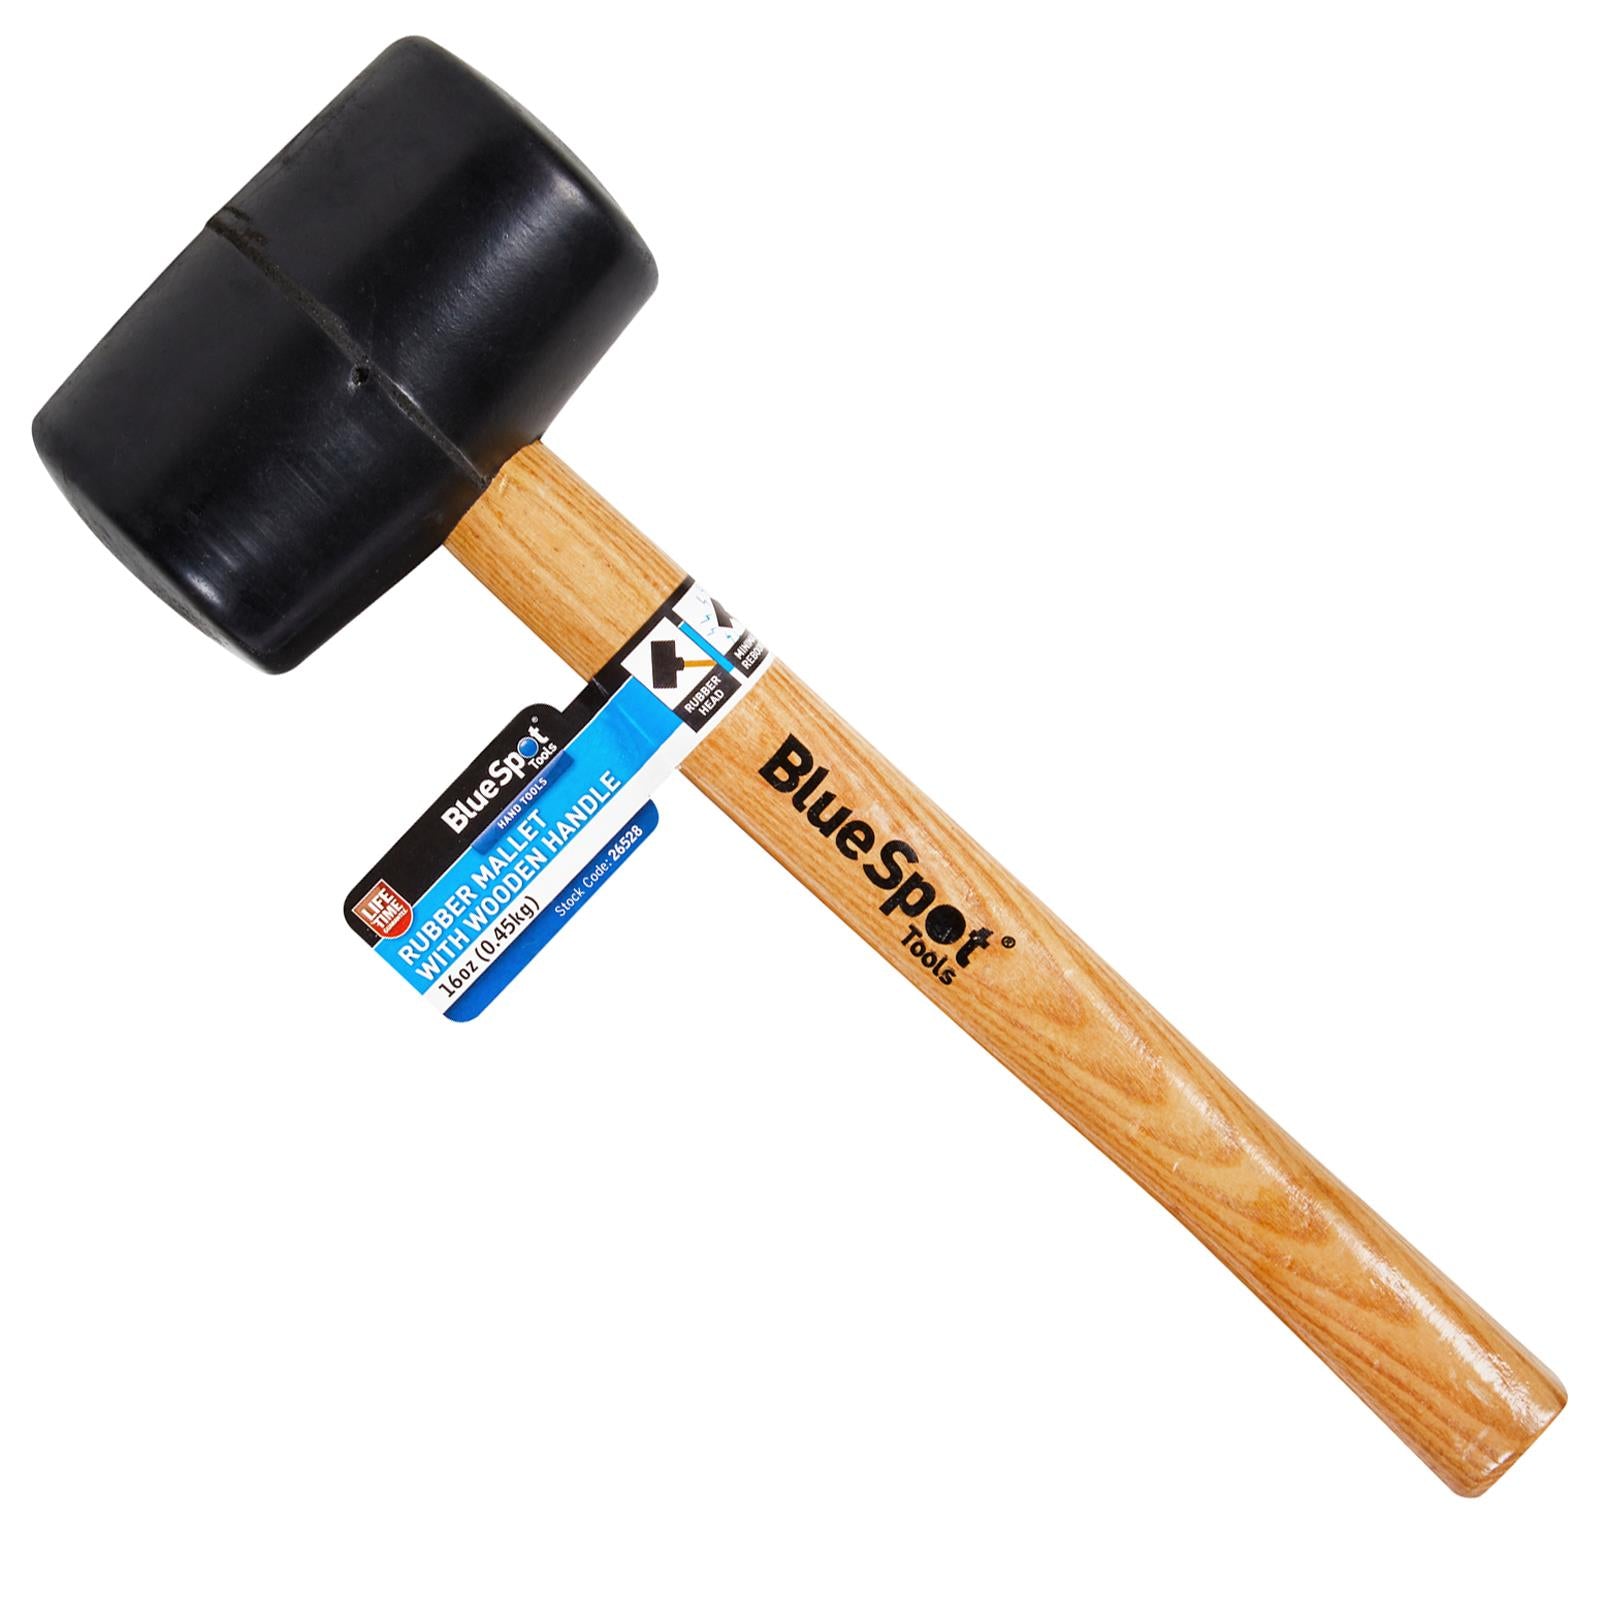 BlueSpot Black Rubber Mallet With Wooden Handle 16oz